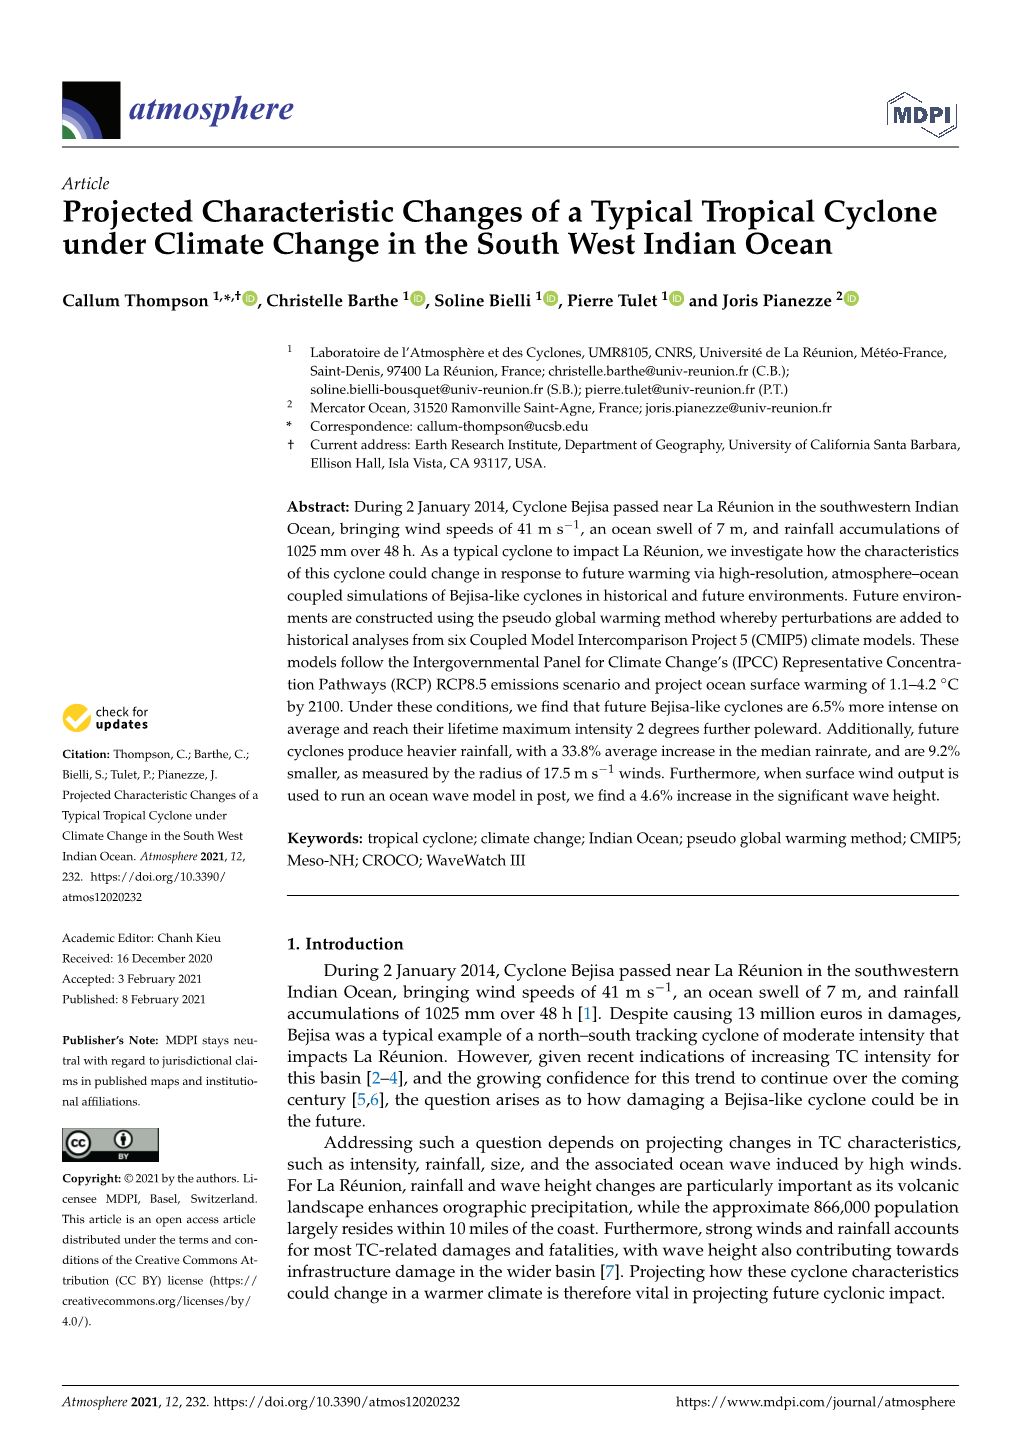 Projected Characteristic Changes of a Typical Tropical Cyclone Under Climate Change in the South West Indian Ocean